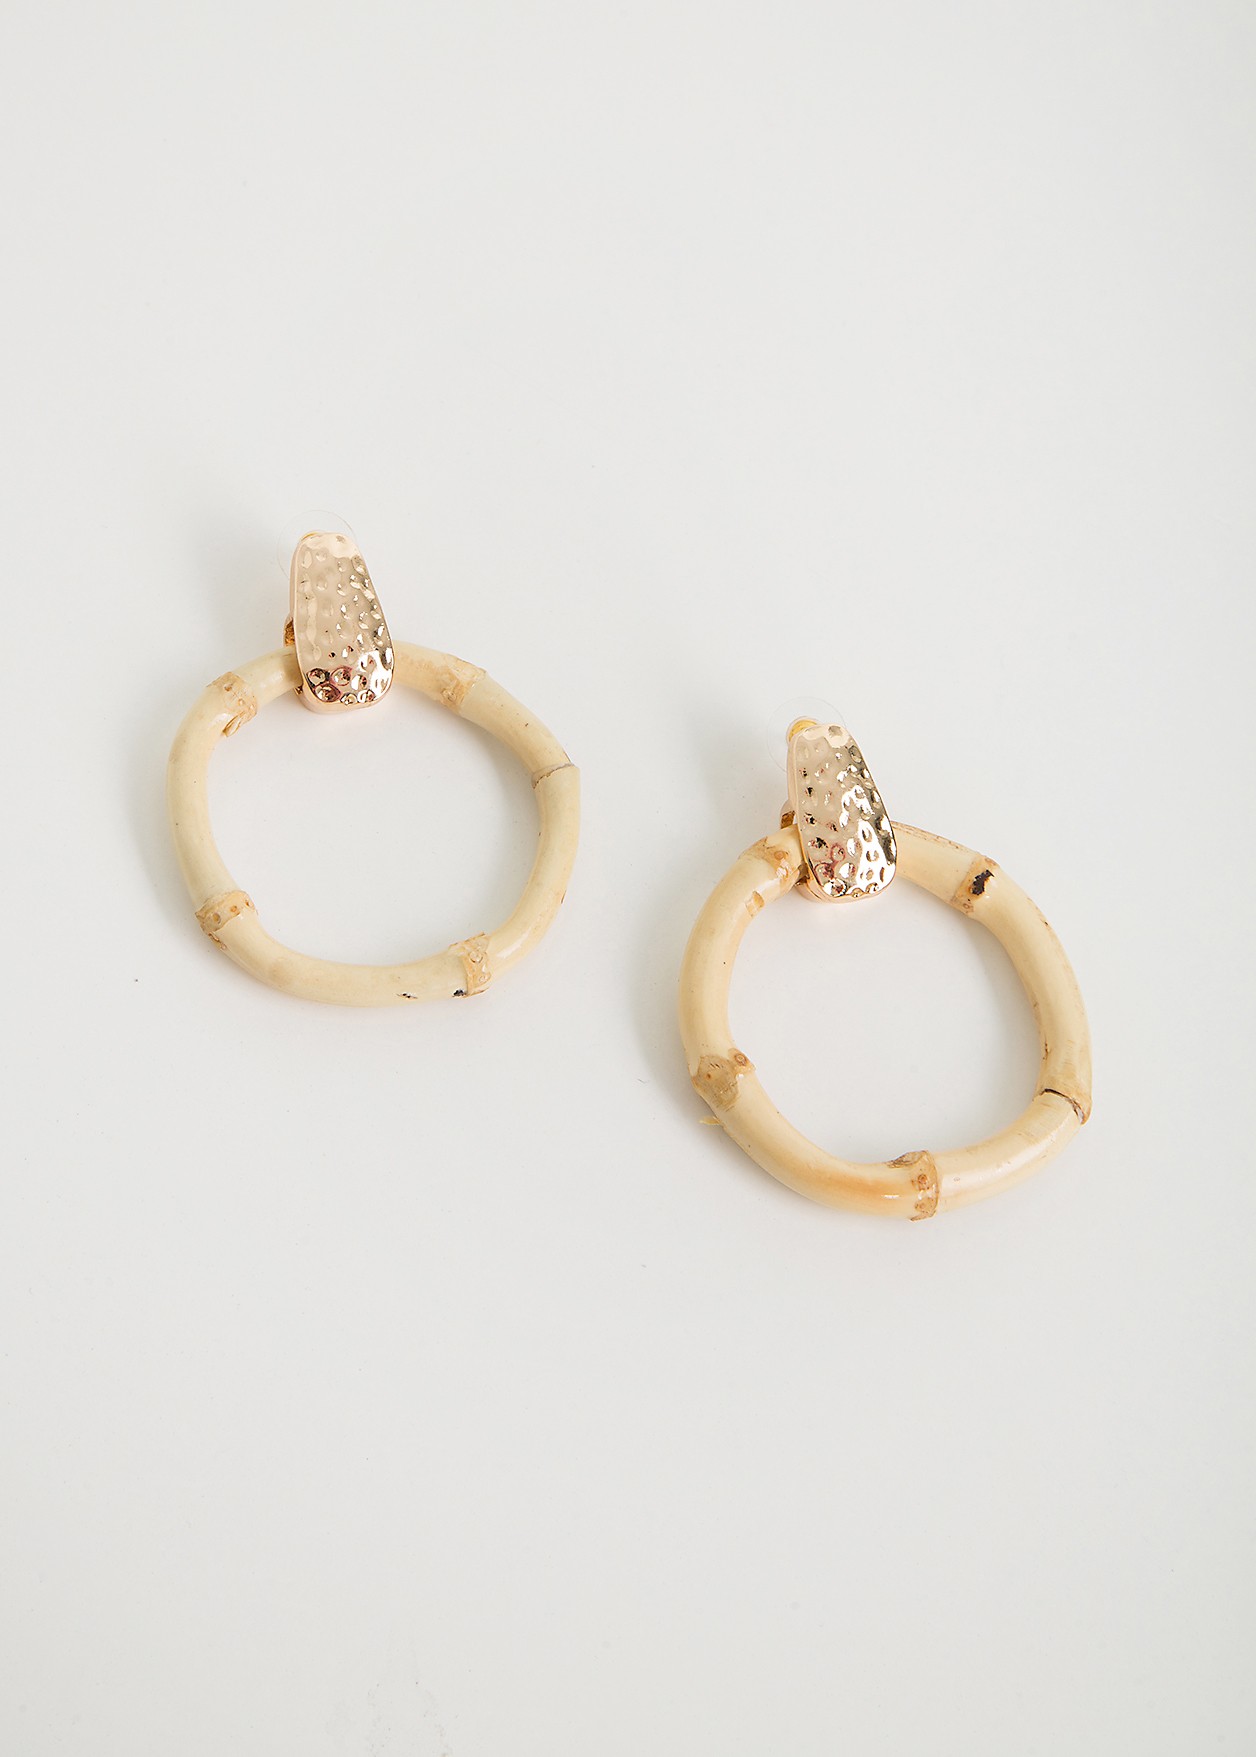 Earrings with bamboo details